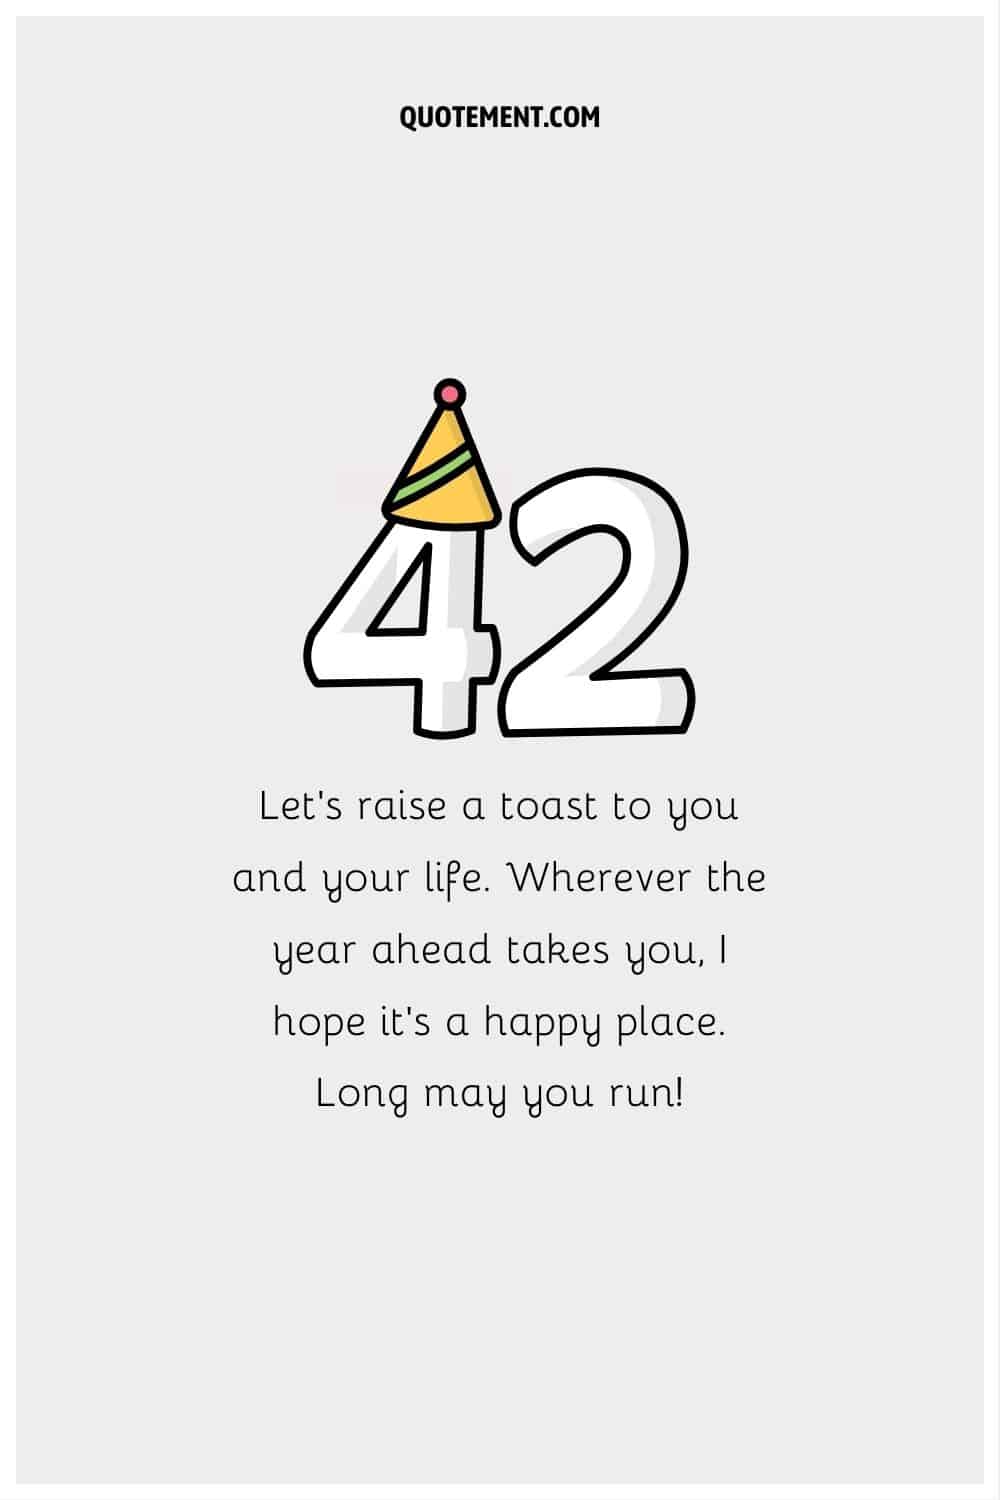 number 42 image representing the best way to say happy 42nd birthday